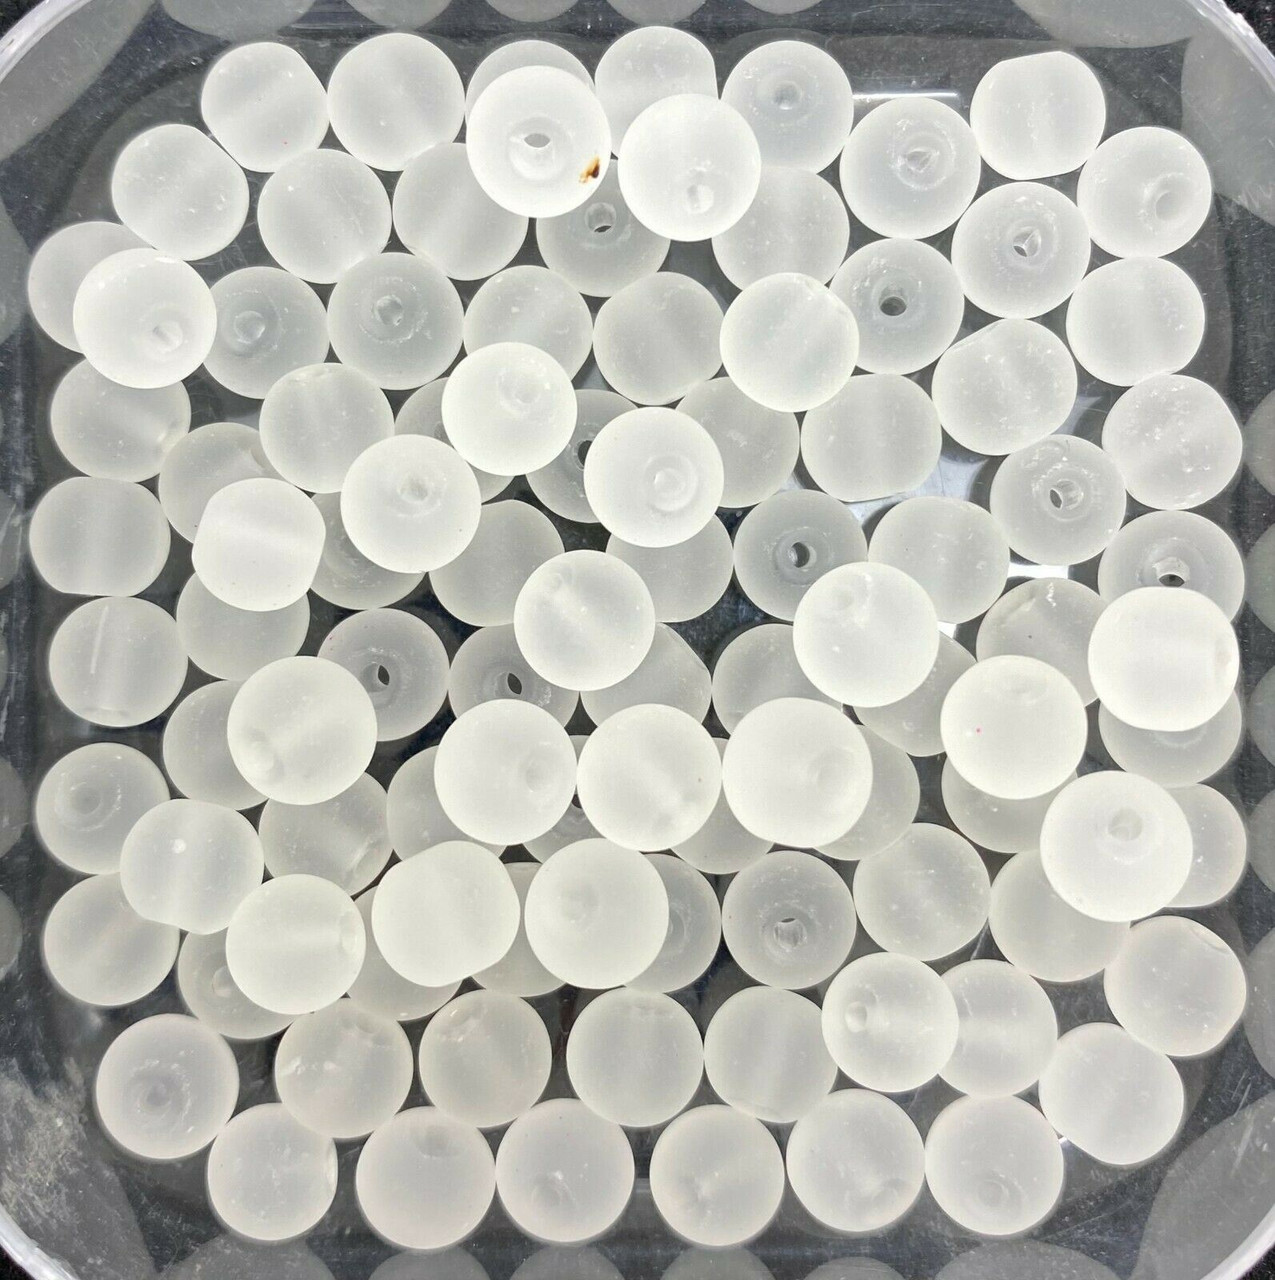 6mm Frosted Glass Beads - White, approx 100 beads